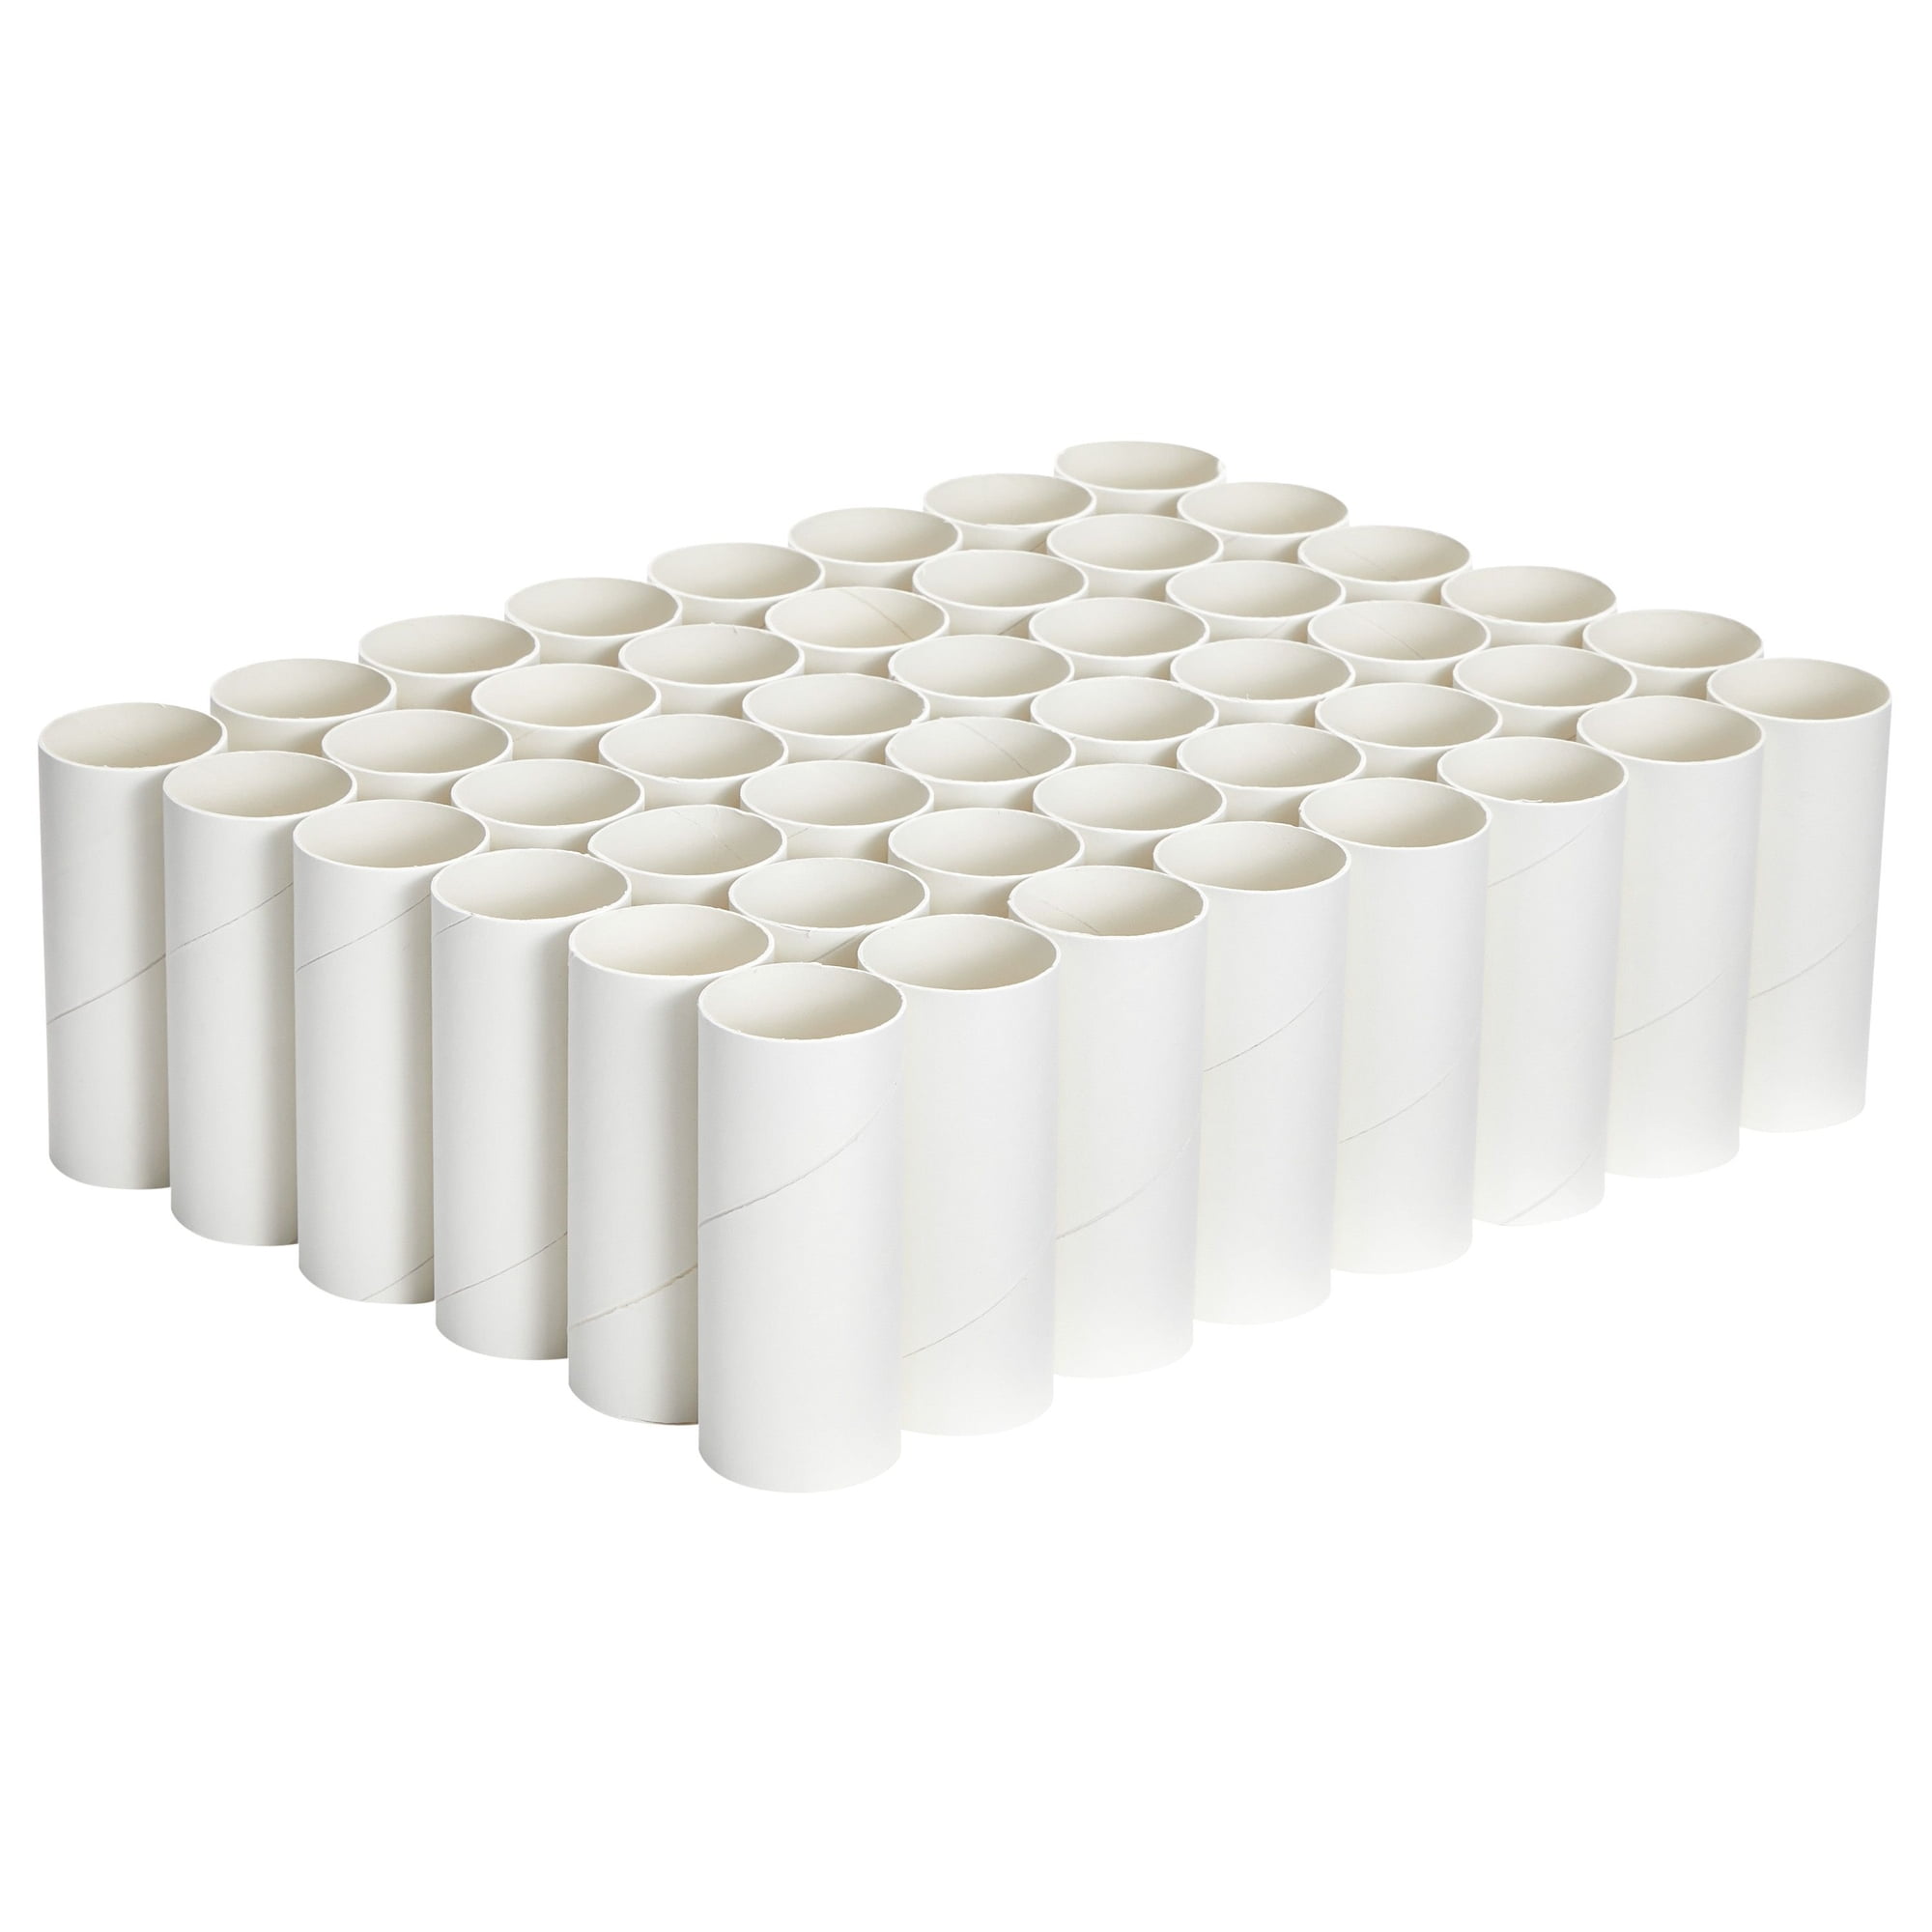 24 High Quality White Cardboard Tubes for Crafts, Empty Toilet Paper Rolls